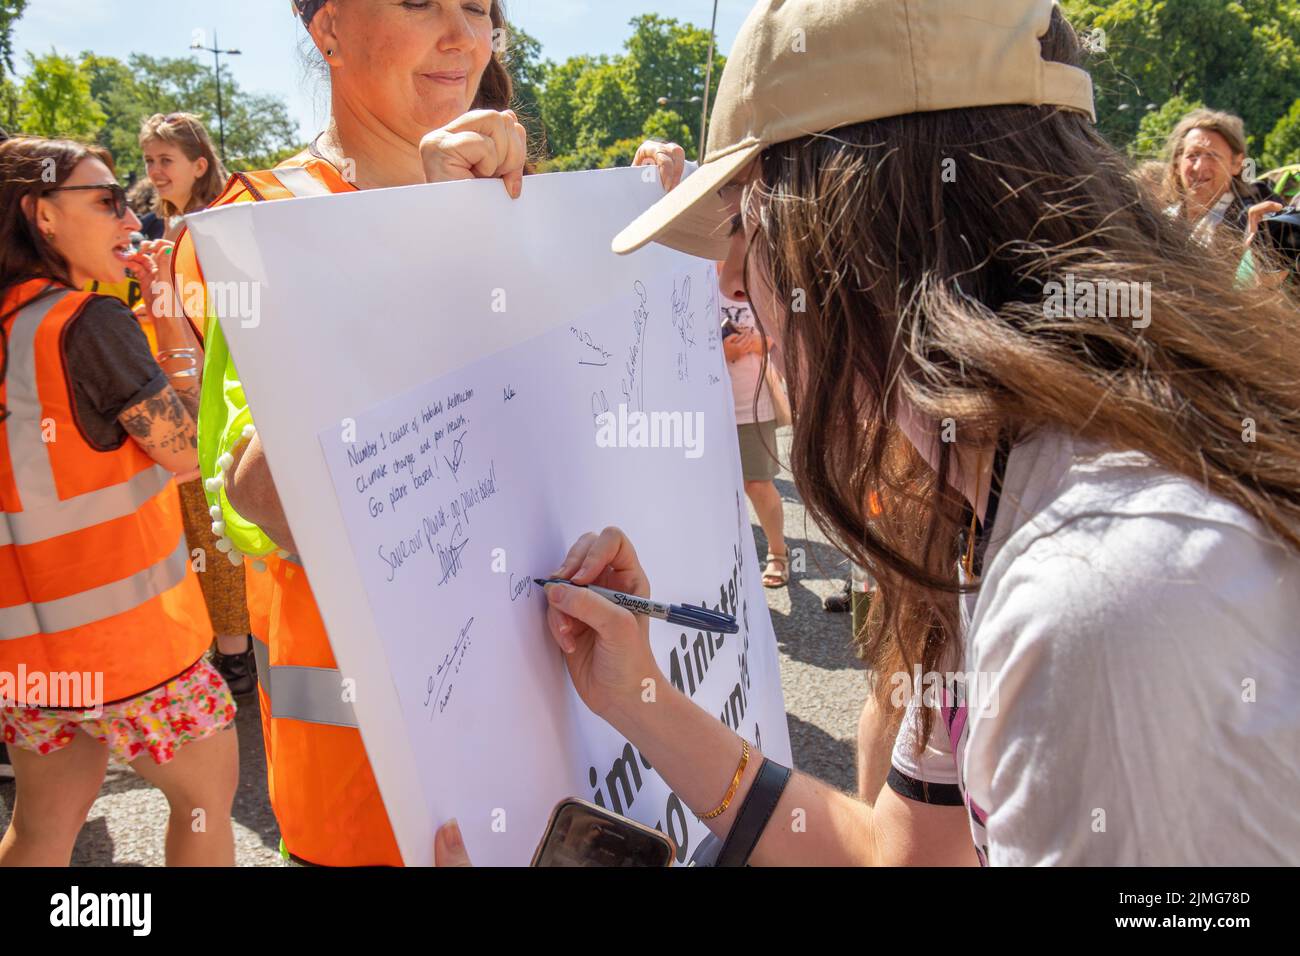 London, England, UK 6 August 2022National Animal Rights march from Marble Arch to Parliament Square, via Downing Street where protesters called on Boris Johnson to tackle climate change by limiting the meat and dairy industry Credit: Denise Laura Baker/Alamy Live News Stock Photo